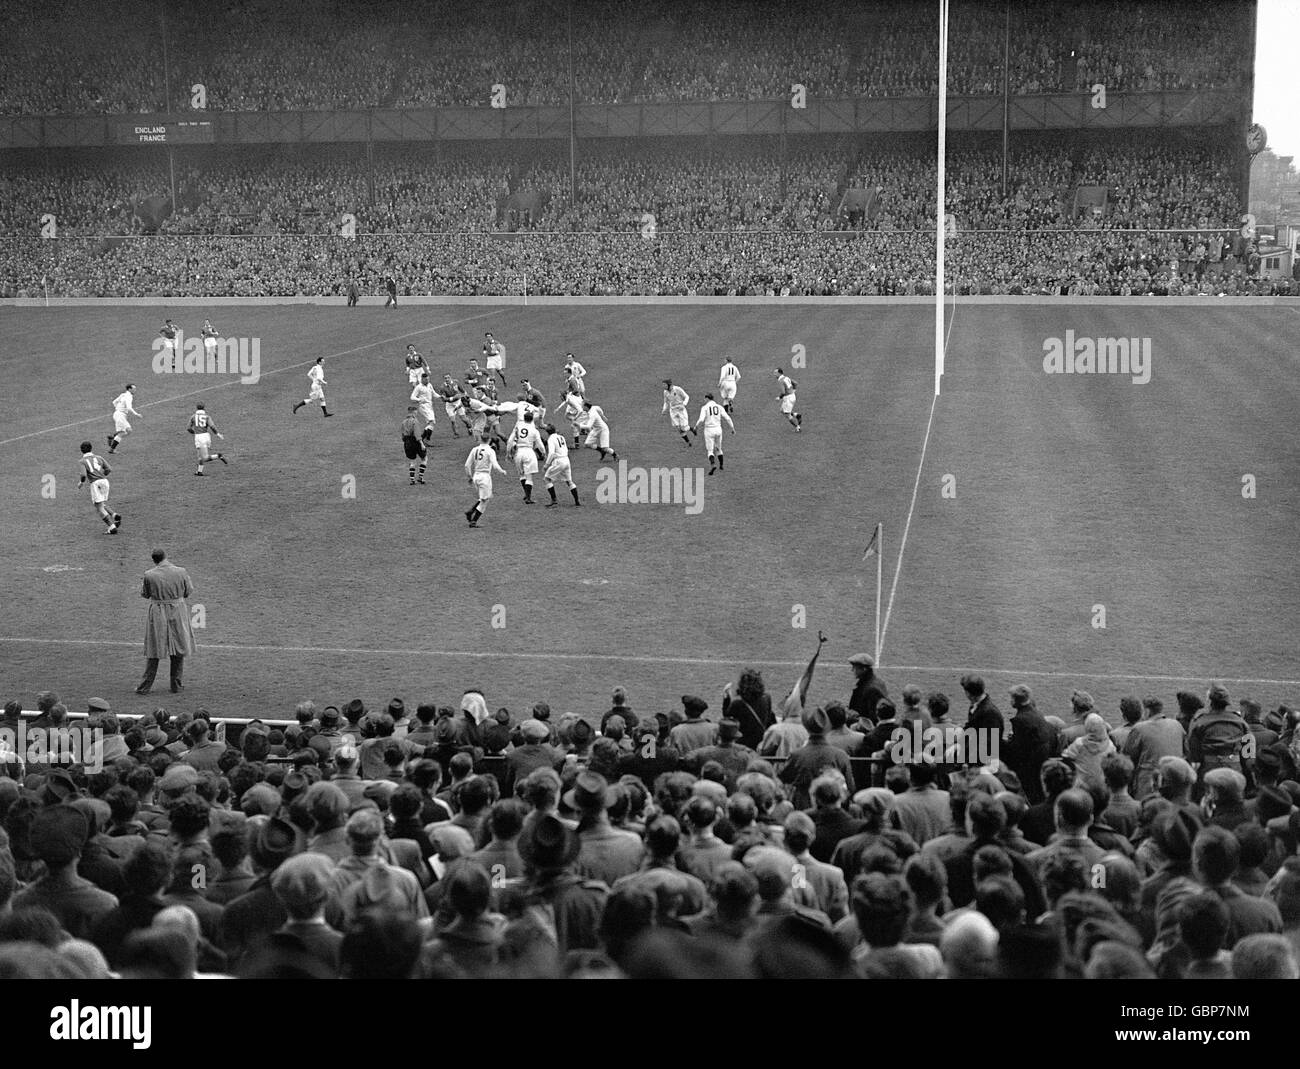 Rugby Union - Five Nations Championship - England v France - Twickenham. Play in progress near the England goal line. Stock Photo